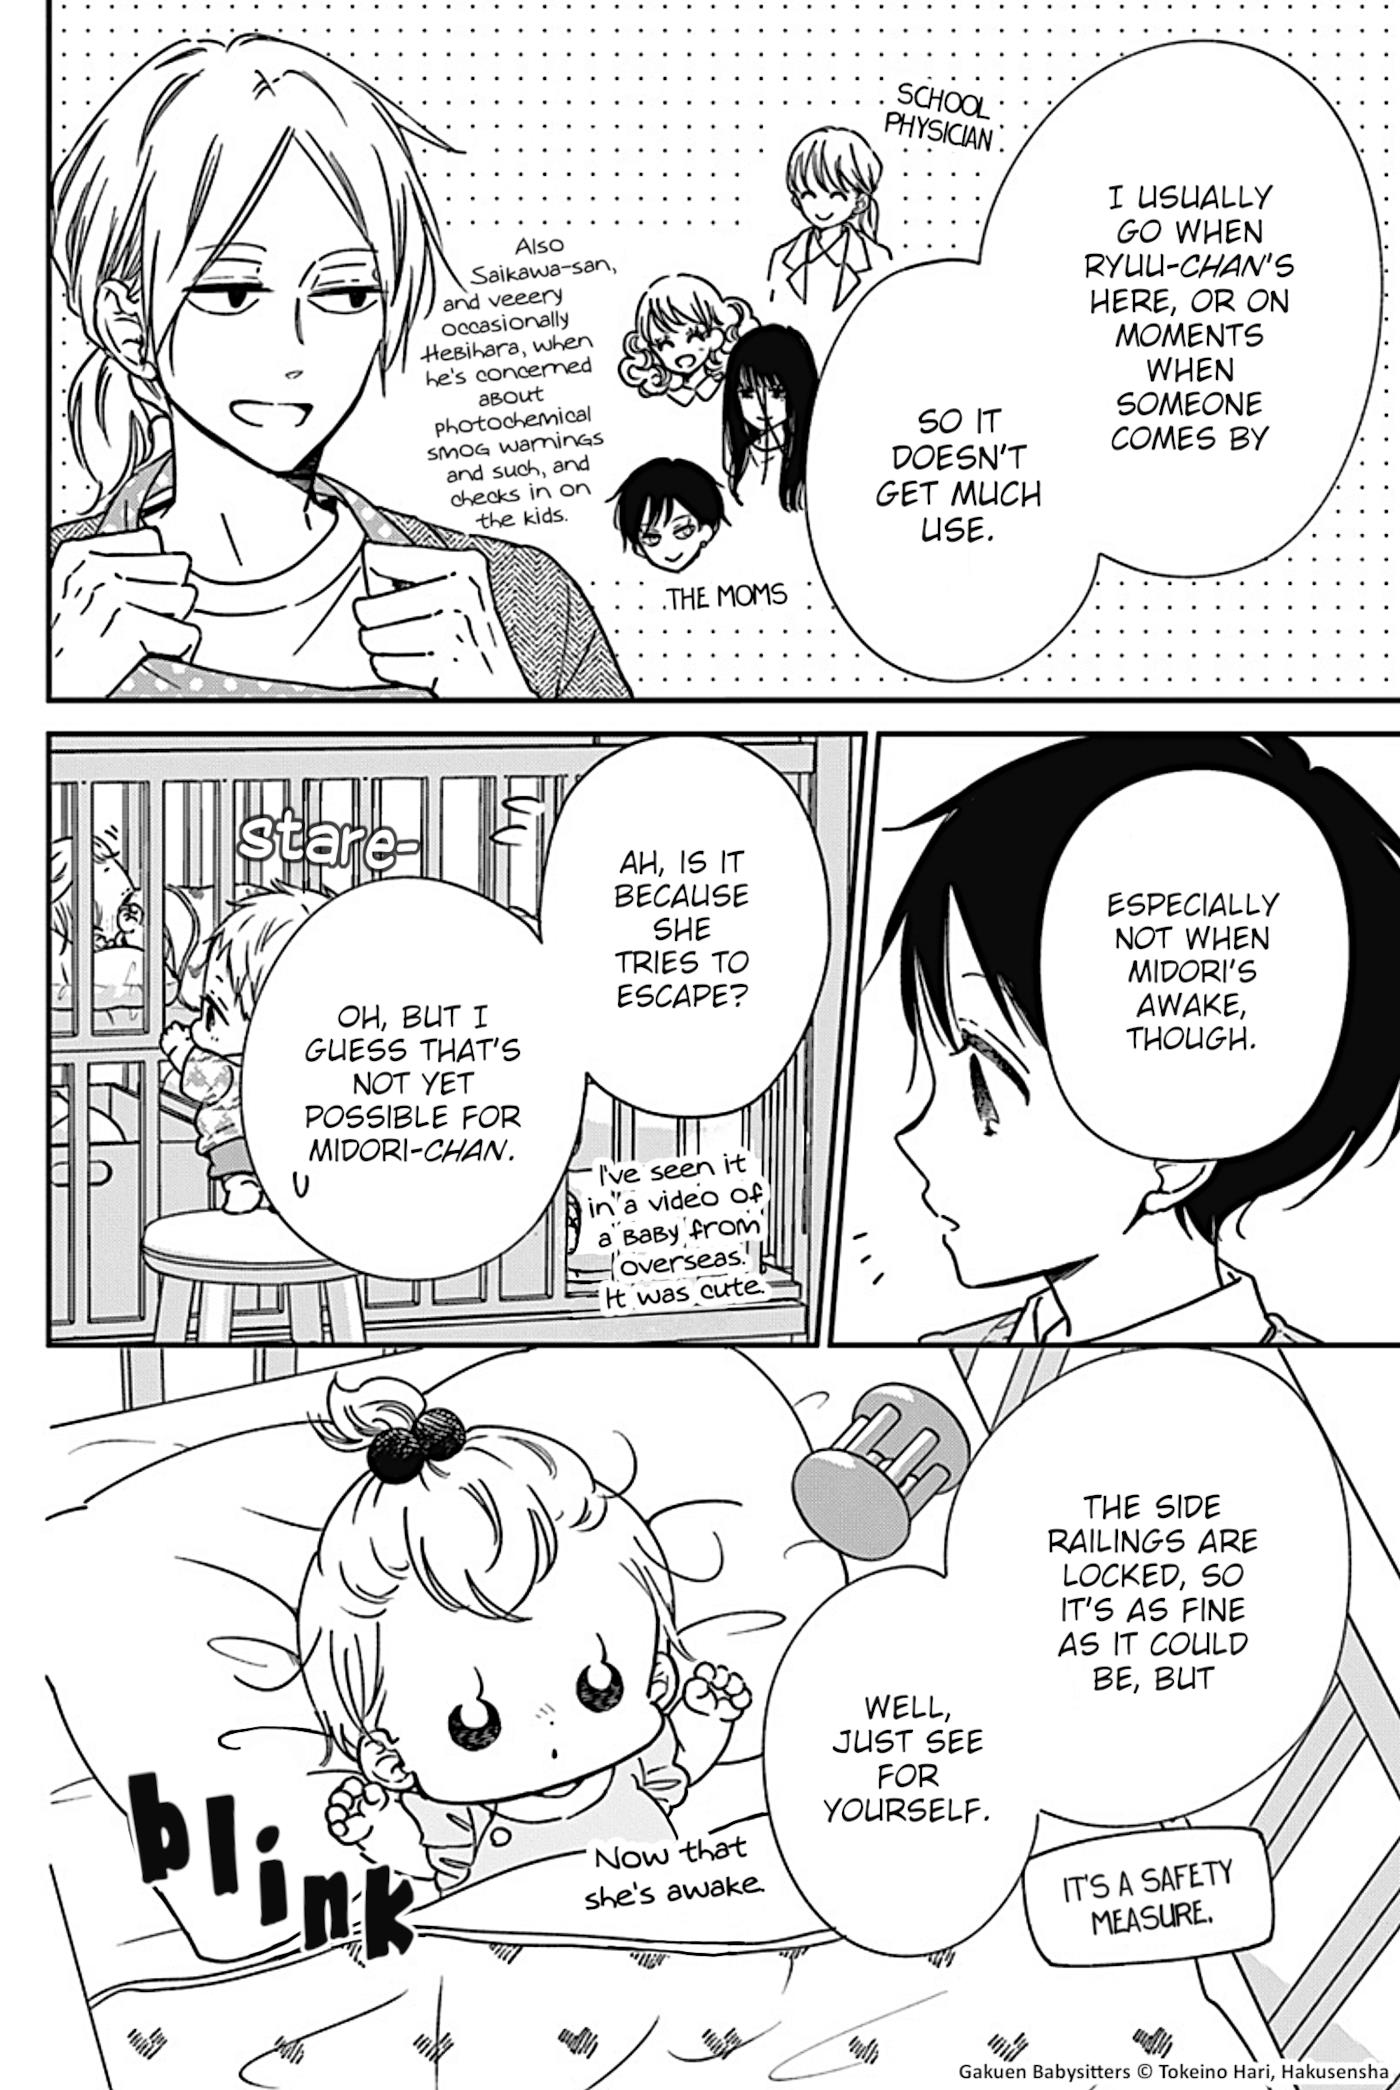 Gakuen Babysitters Vol.25 Chapter 134.5: Midori-Chan And The Baby Bed - Picture 2